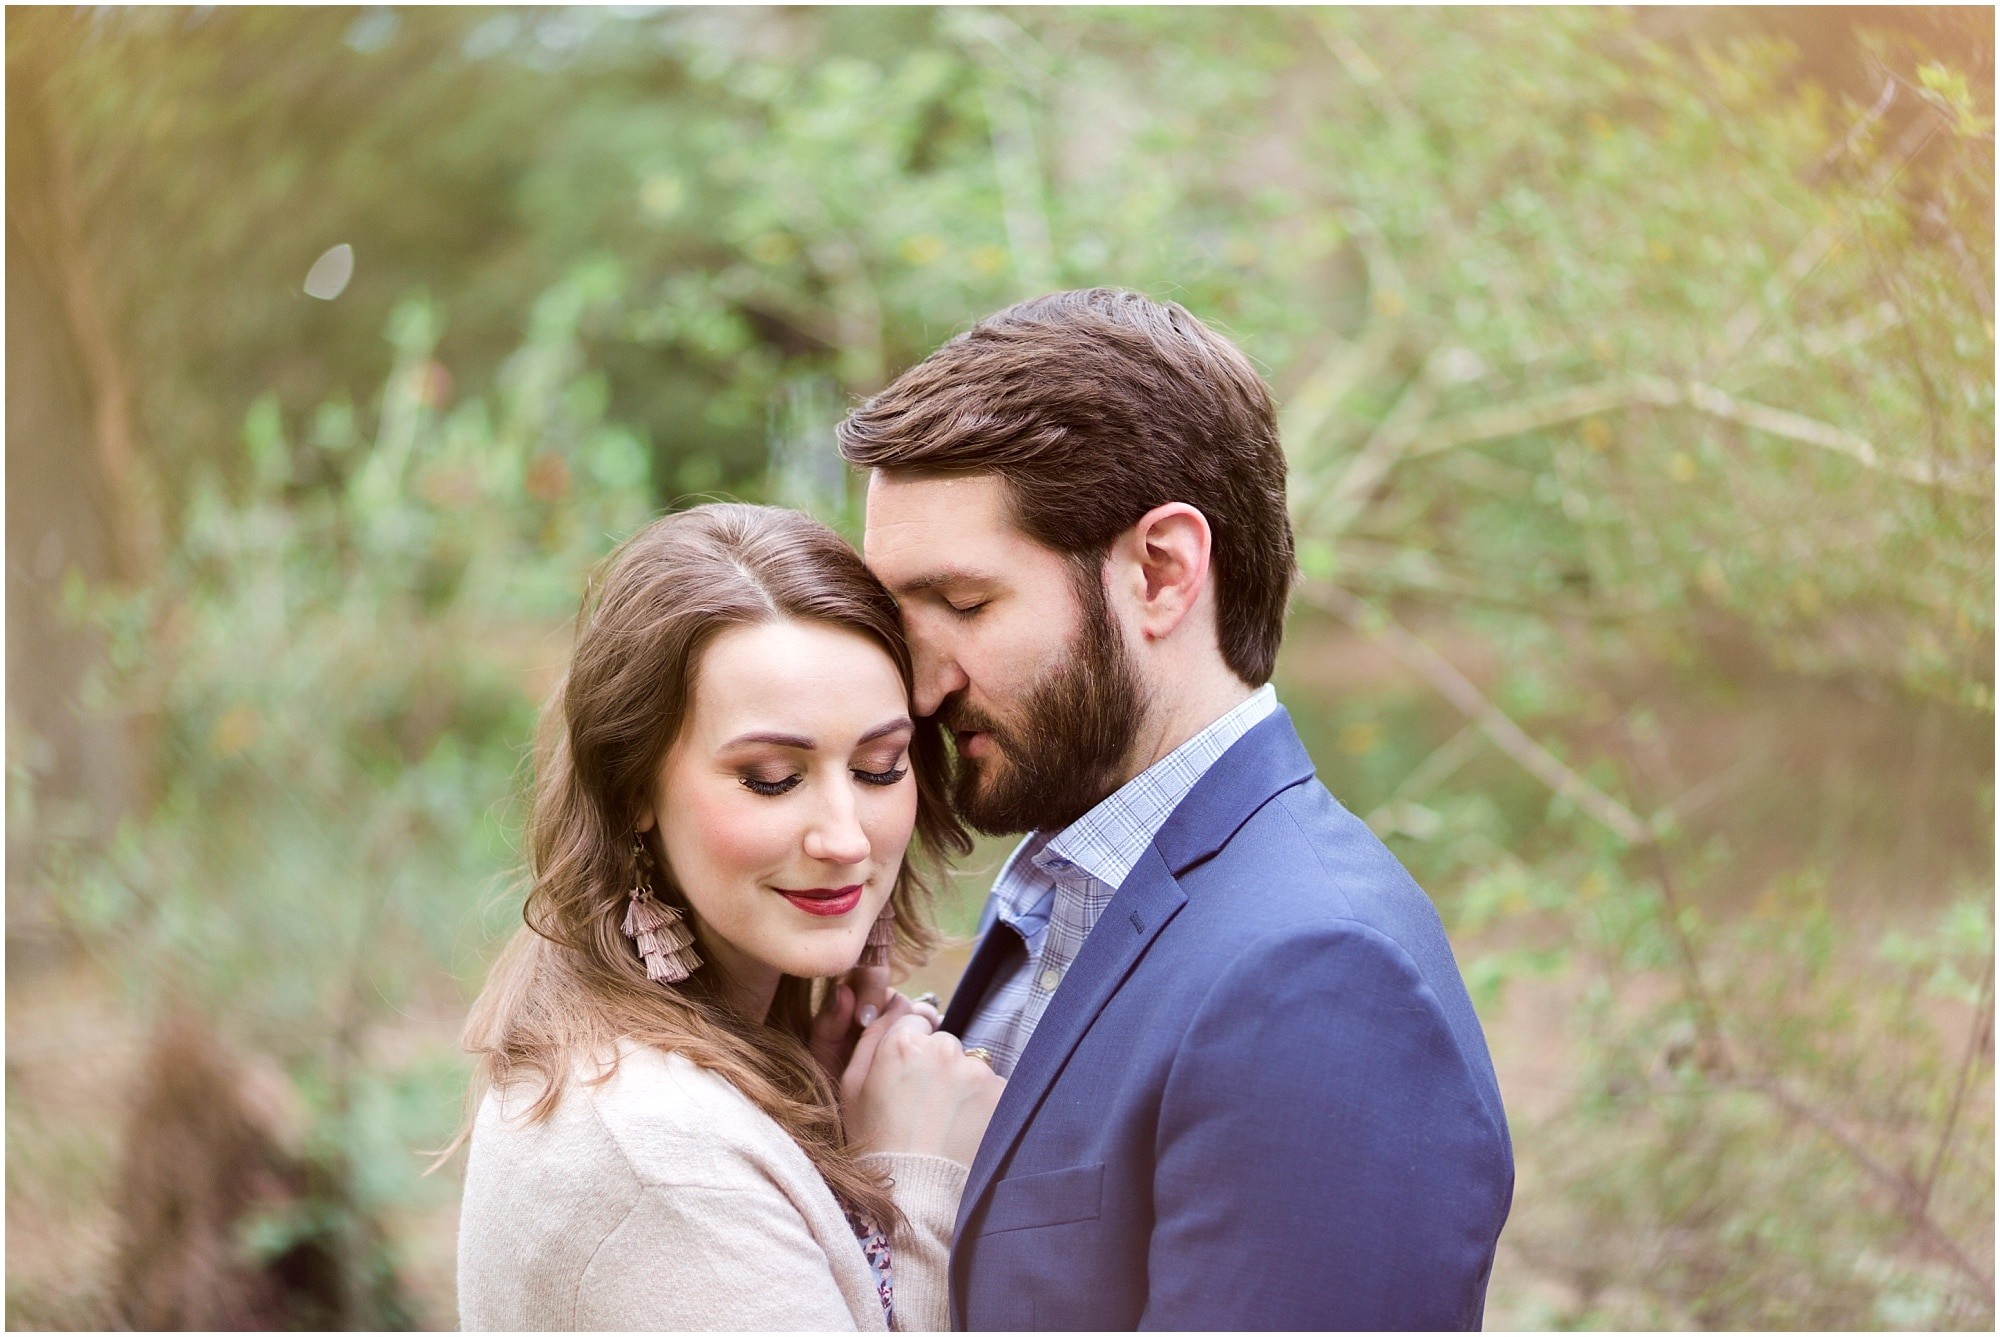 fun engagement session at Houston Arboretum in Houston, Texas photographed by Swish and Click Photography